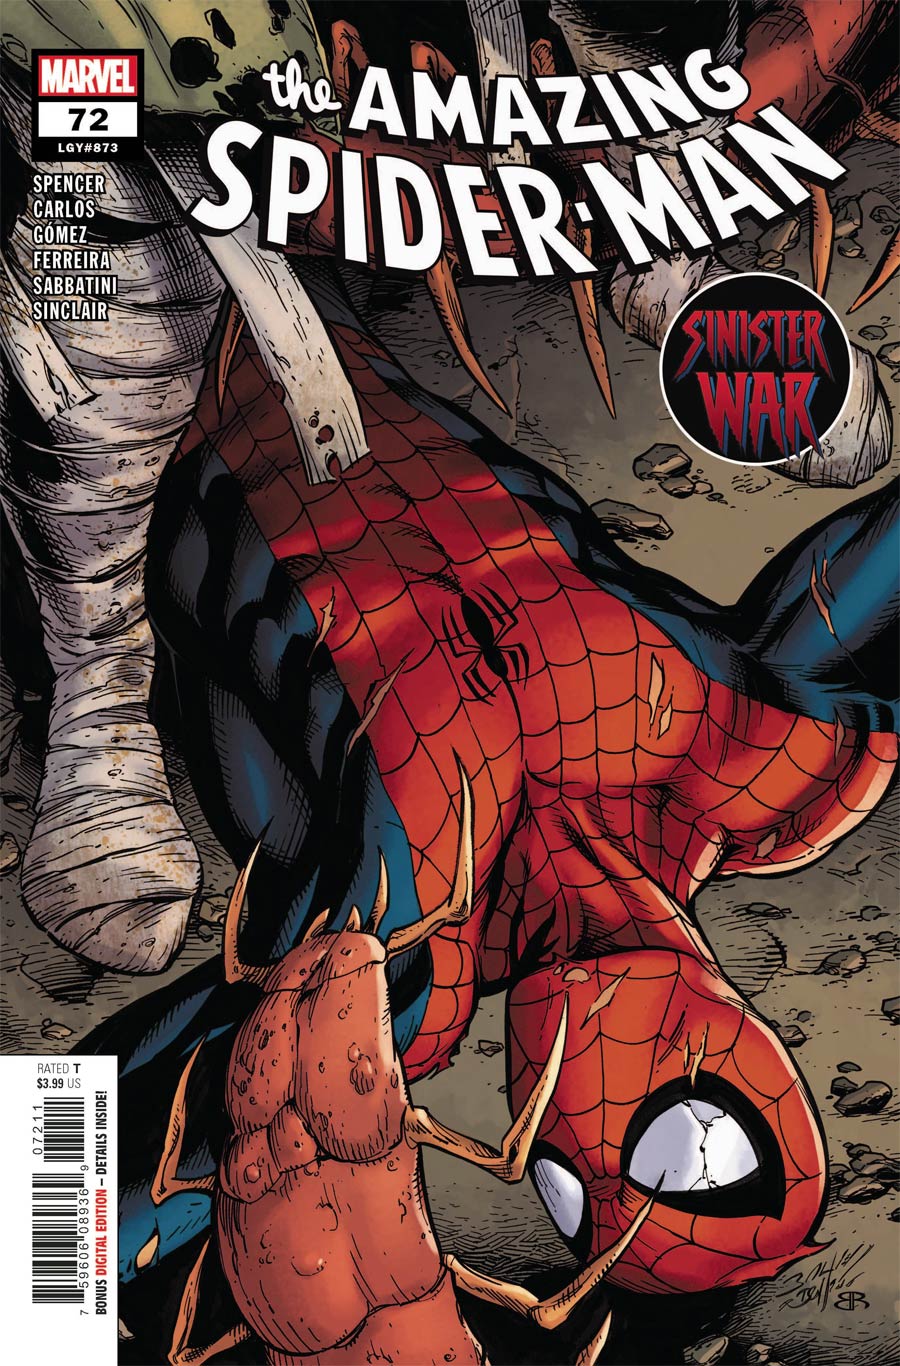 Amazing Spider-Man Vol 5 #72 Cover A Regular Mark Bagley Cover (Sinister War Tie-In)